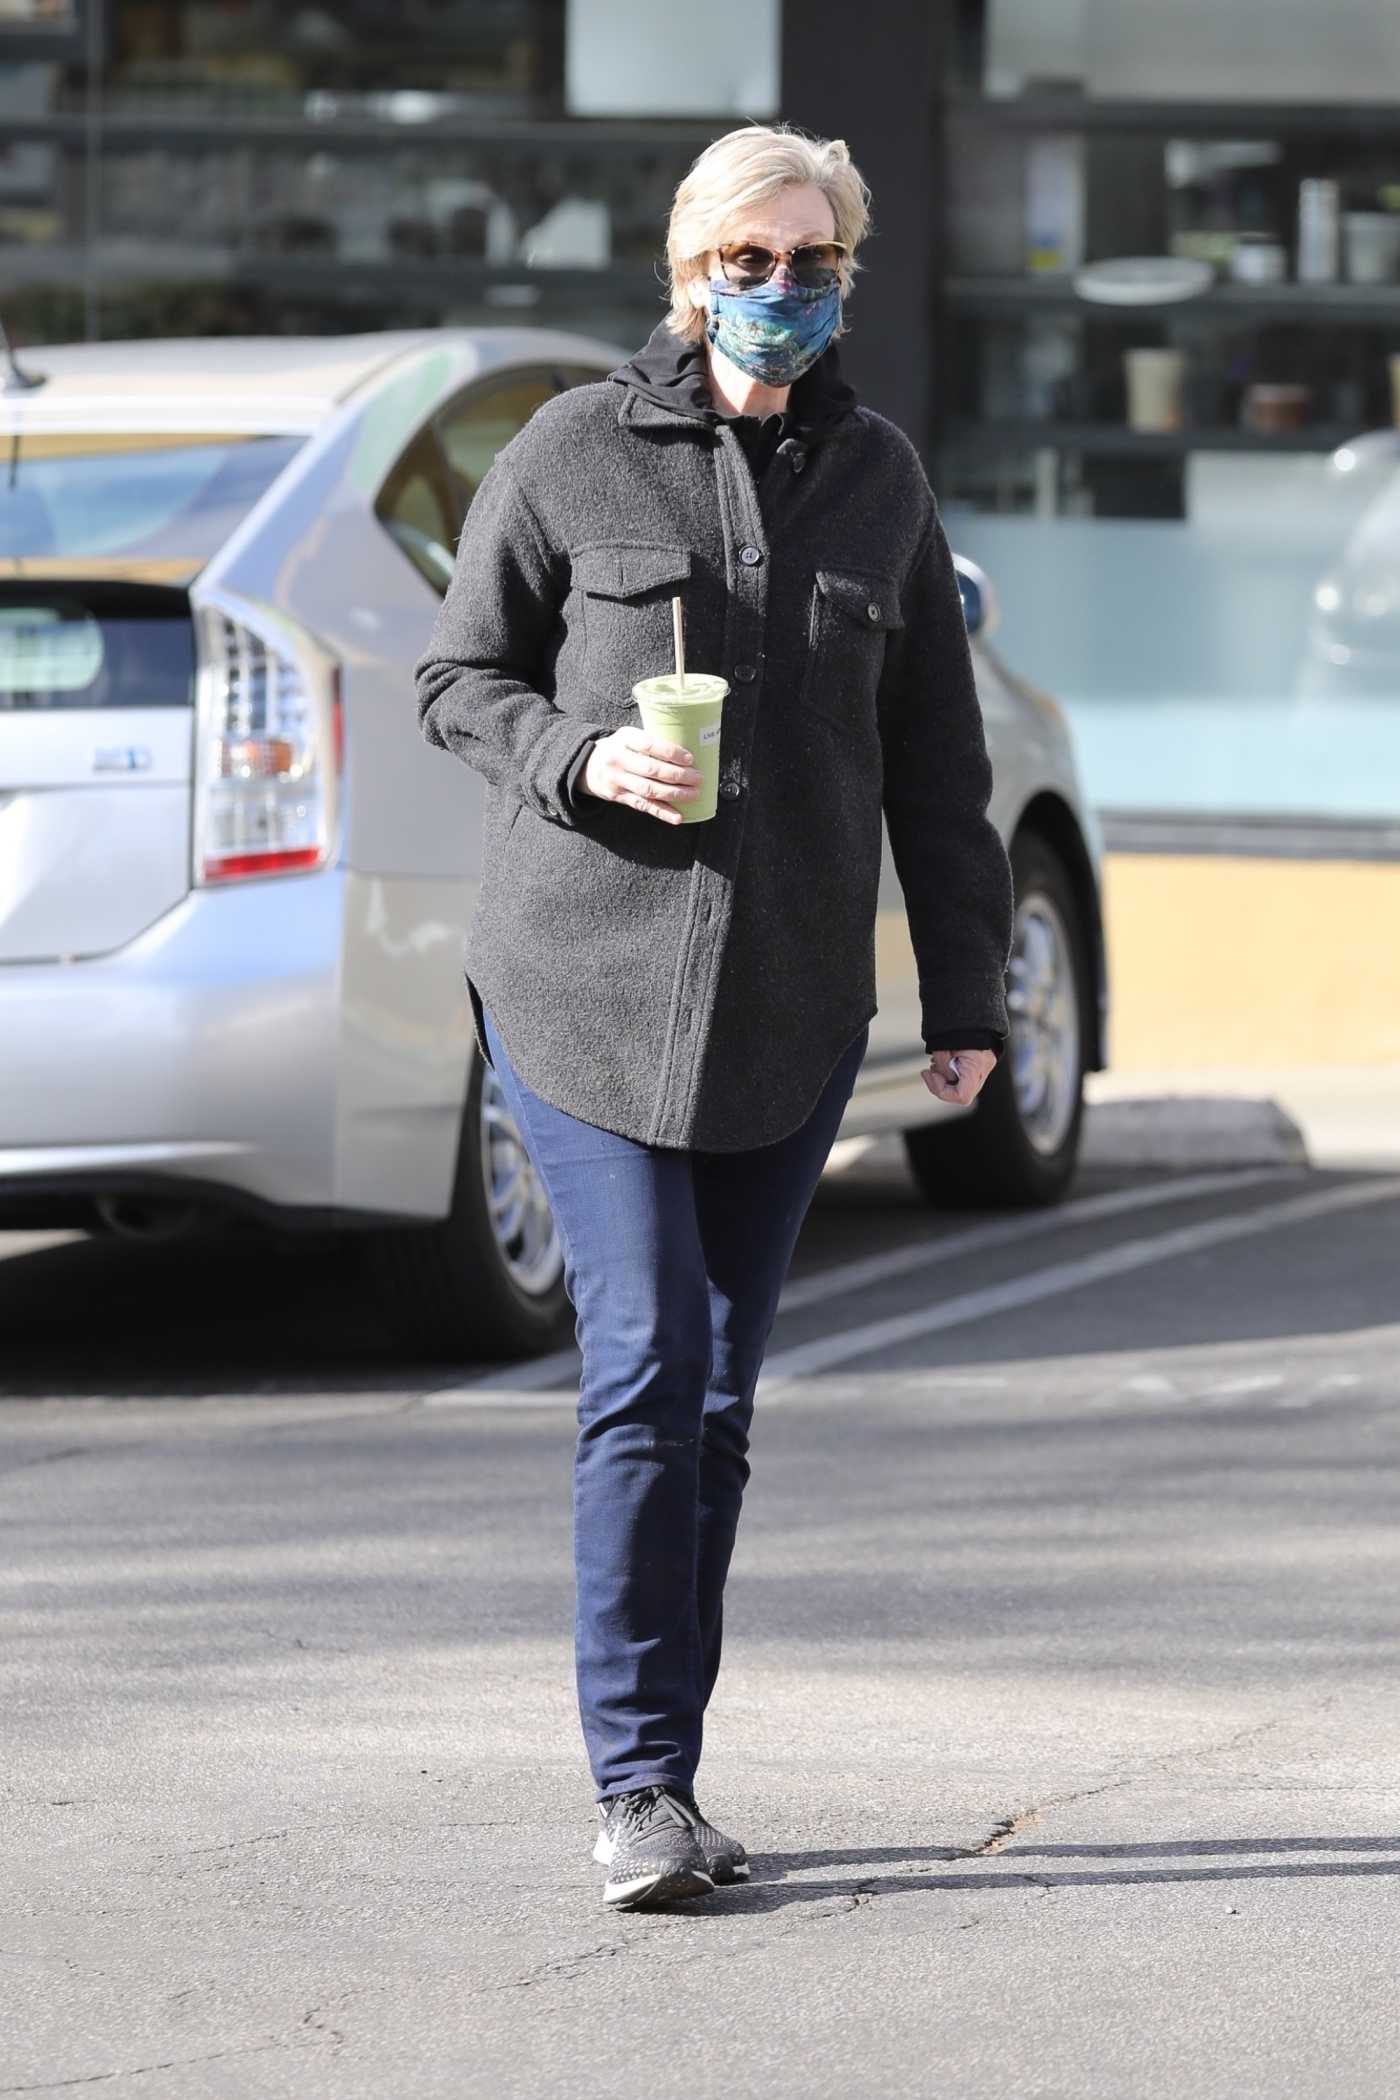 Jane Lynch in a Protective Mask Stops By the Dry Cleaner in Los Angeles 11/08/2020